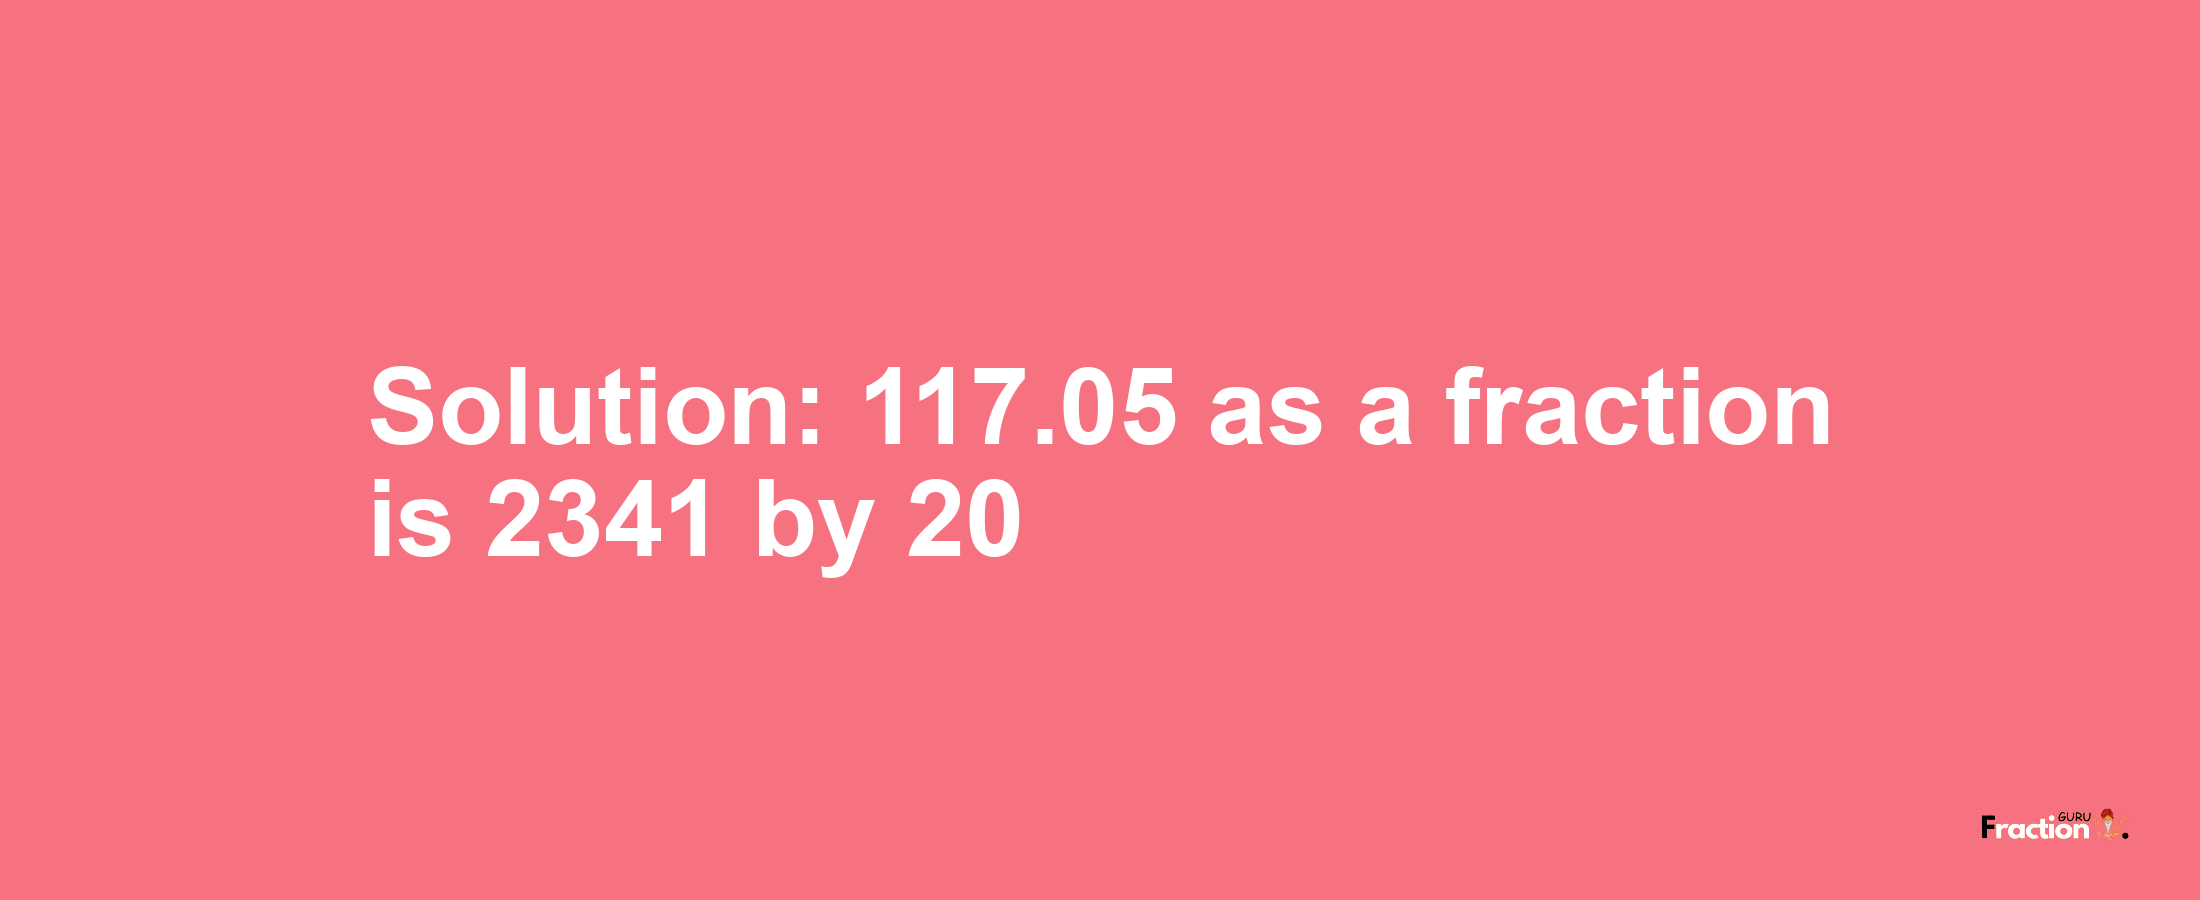 Solution:117.05 as a fraction is 2341/20